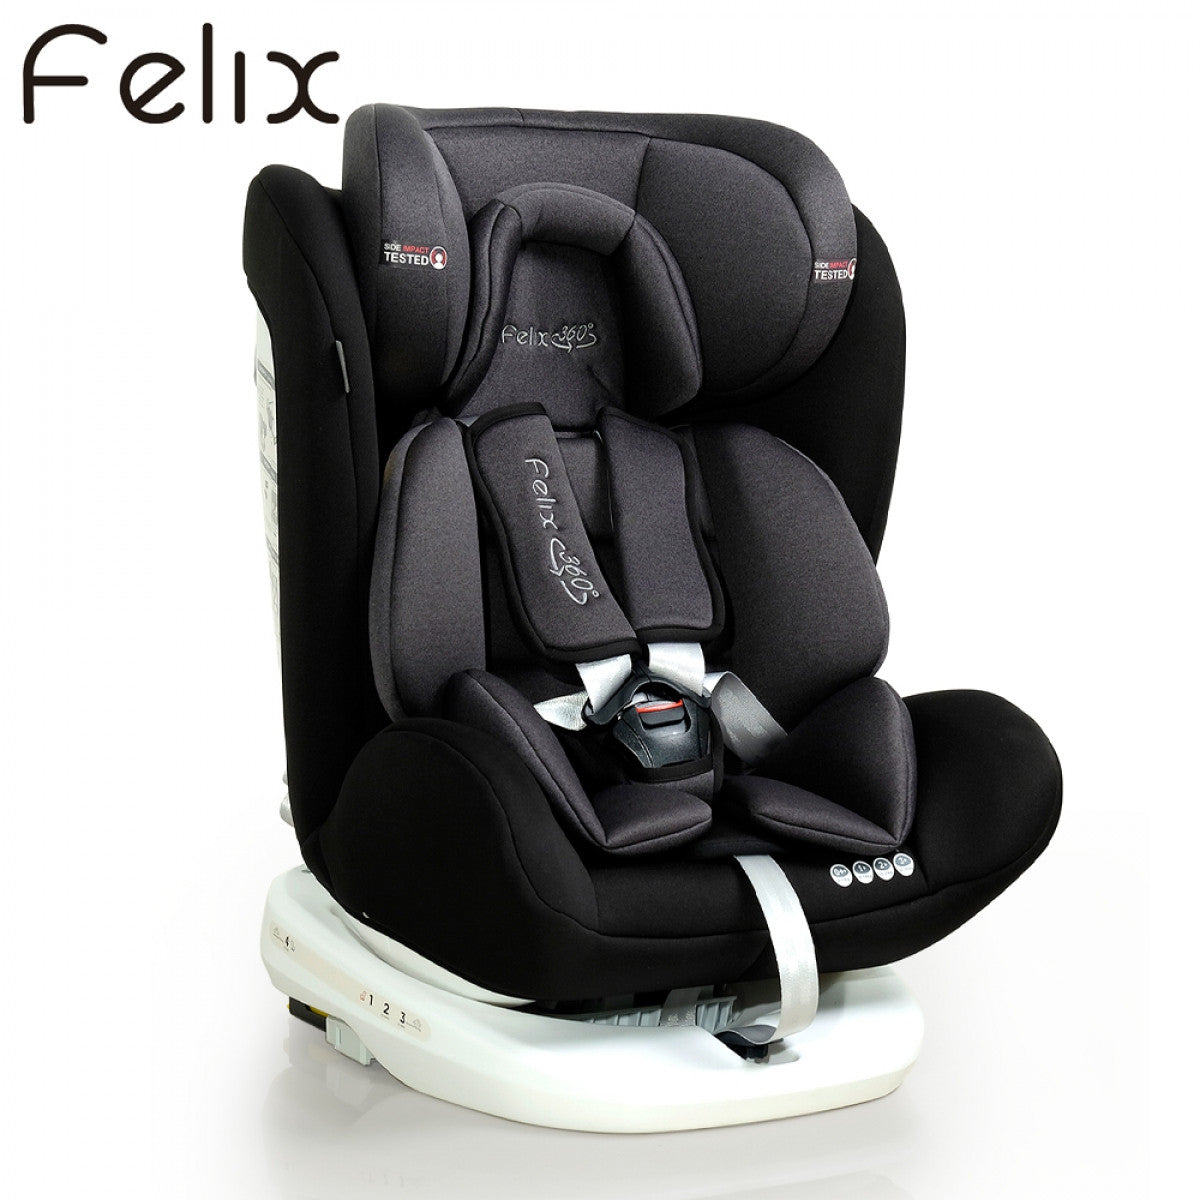 My Dear 30050 Safety Car Seat with Isofix & 360 Degrees Rotation, Suitable for Newborn Baby to 12 Years Old